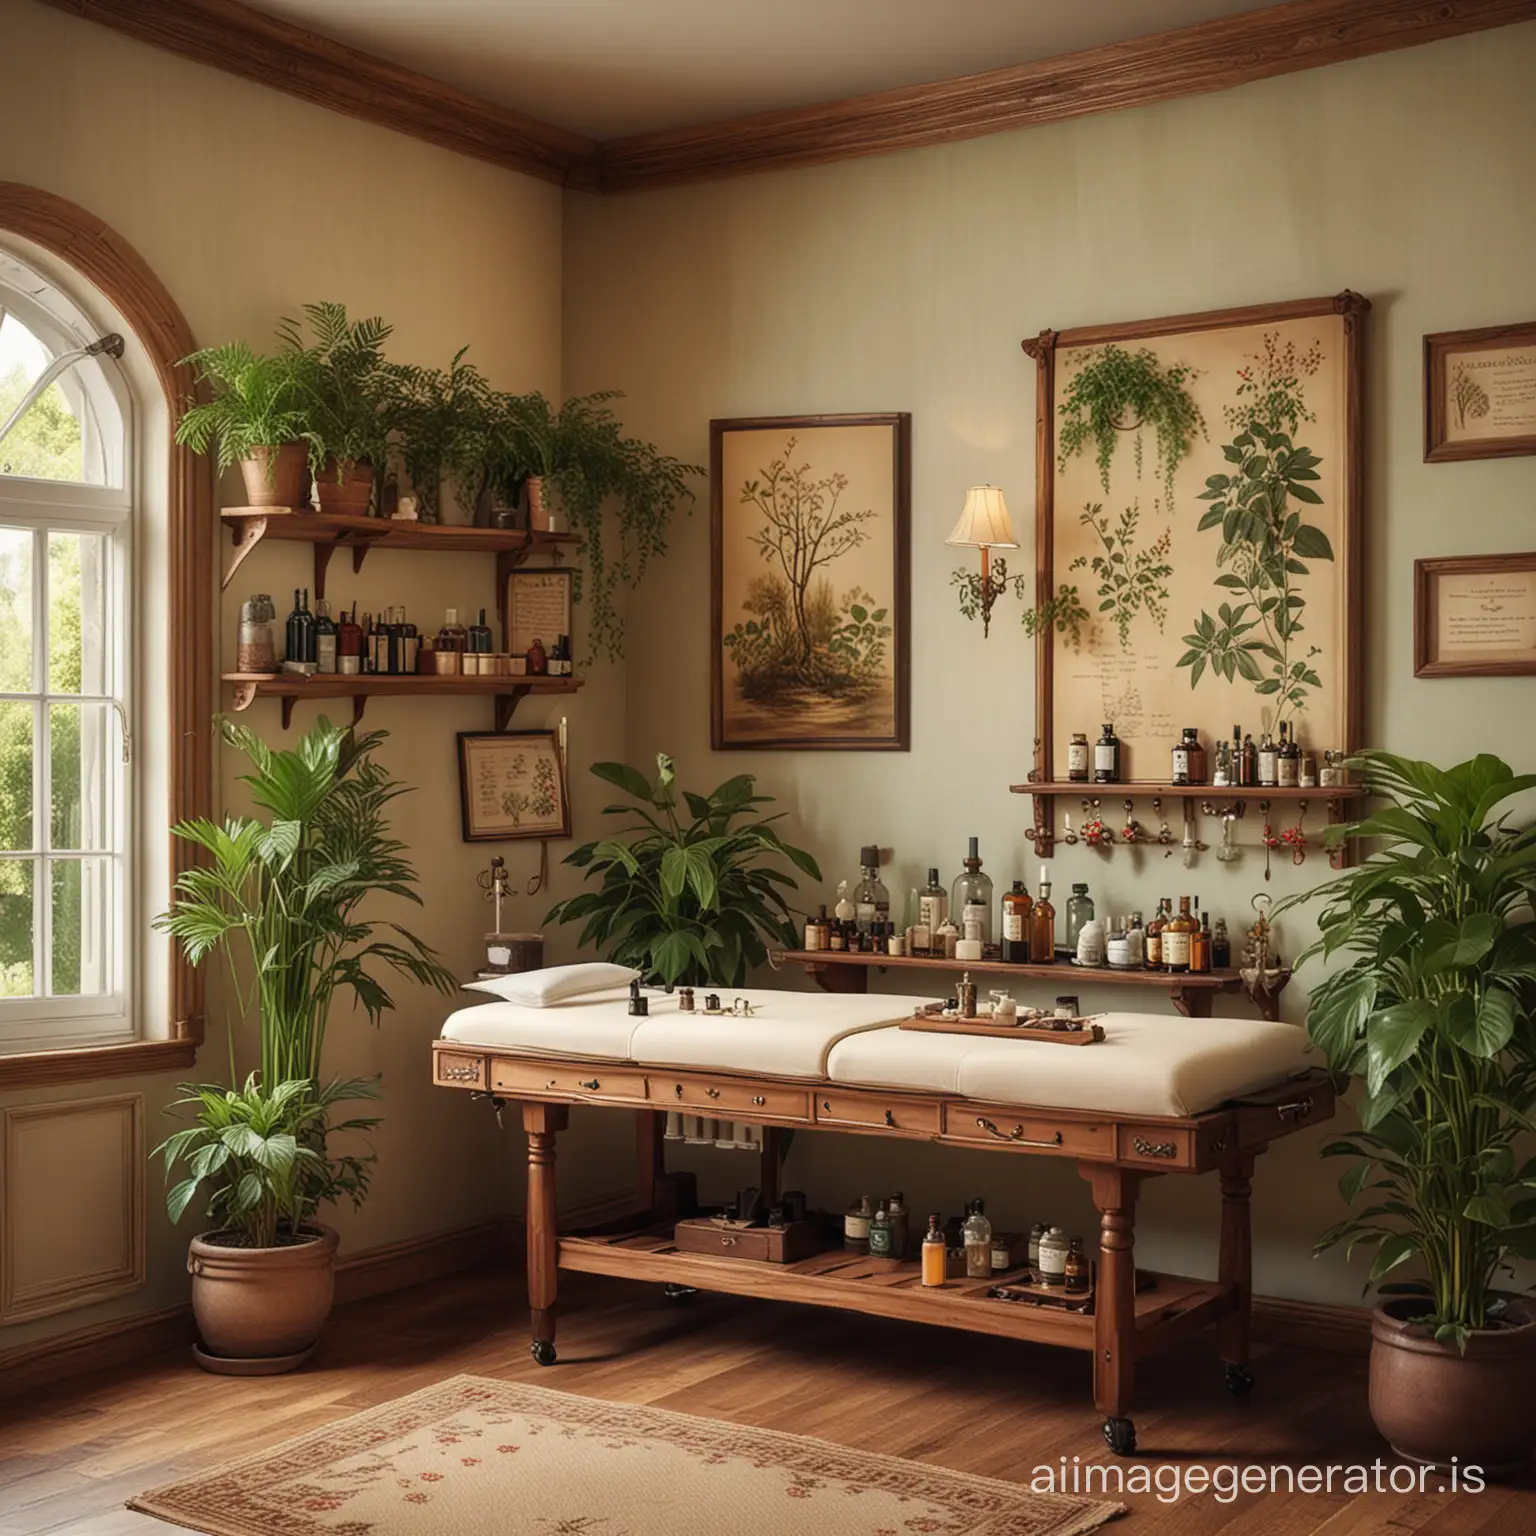 Fantasy-Medical-Treatment-Room-in-English-Manor-Style-with-Plants-and-Potions